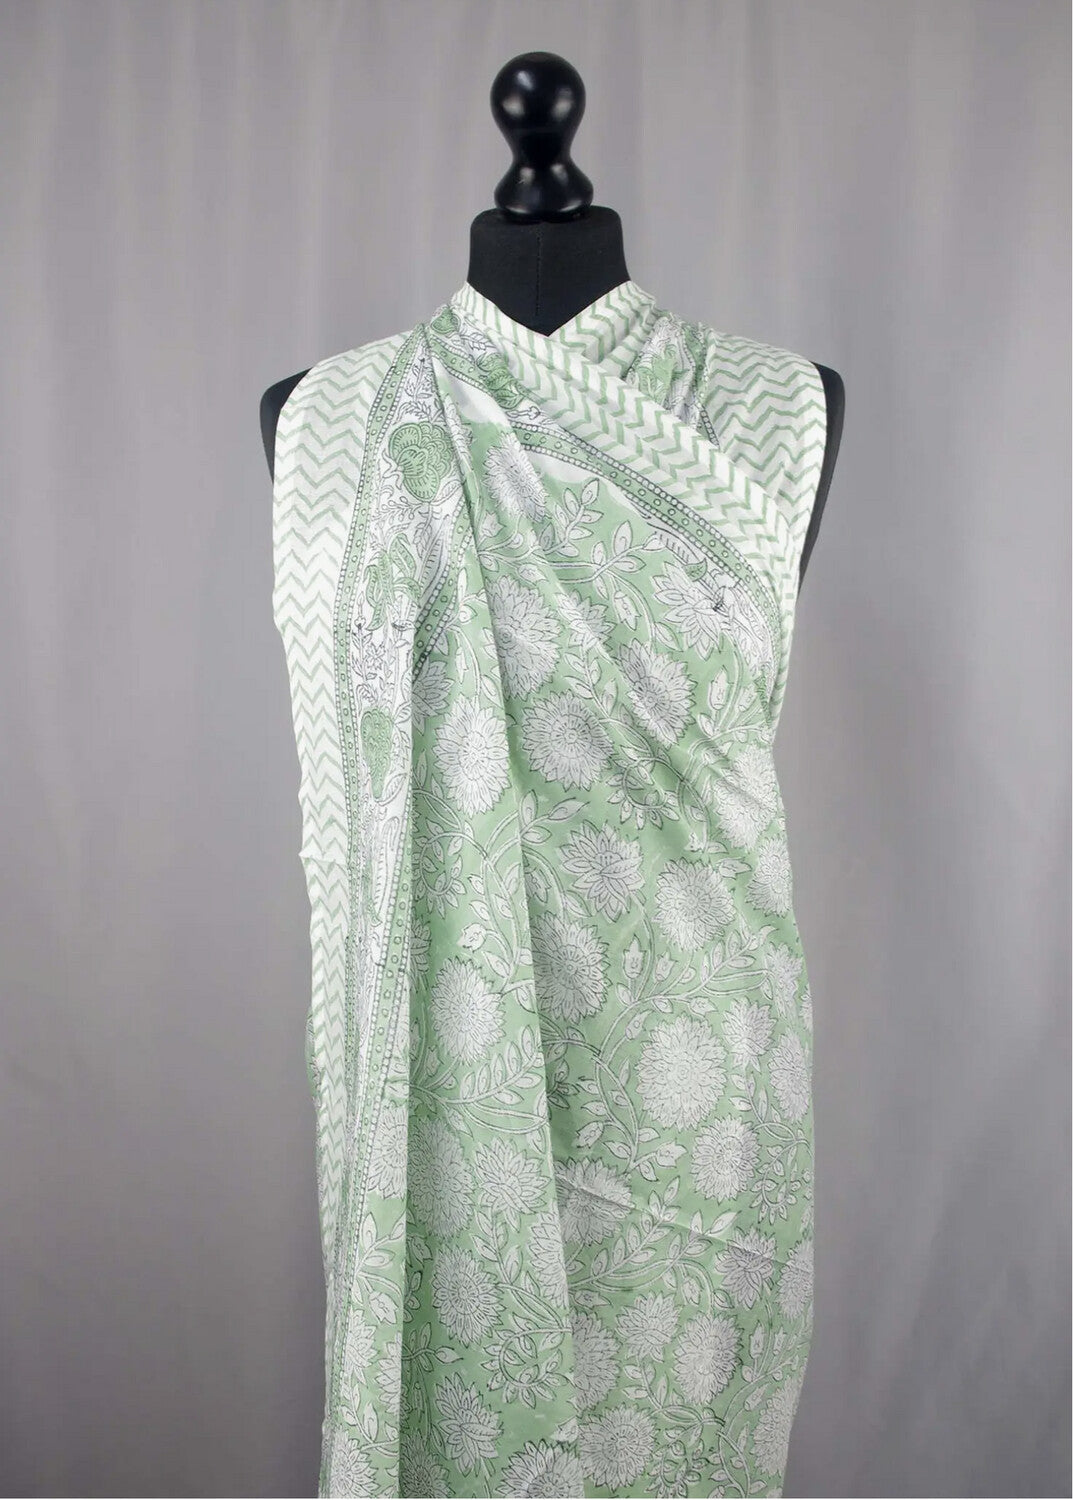 Sarong style fabric shawl/beach cover